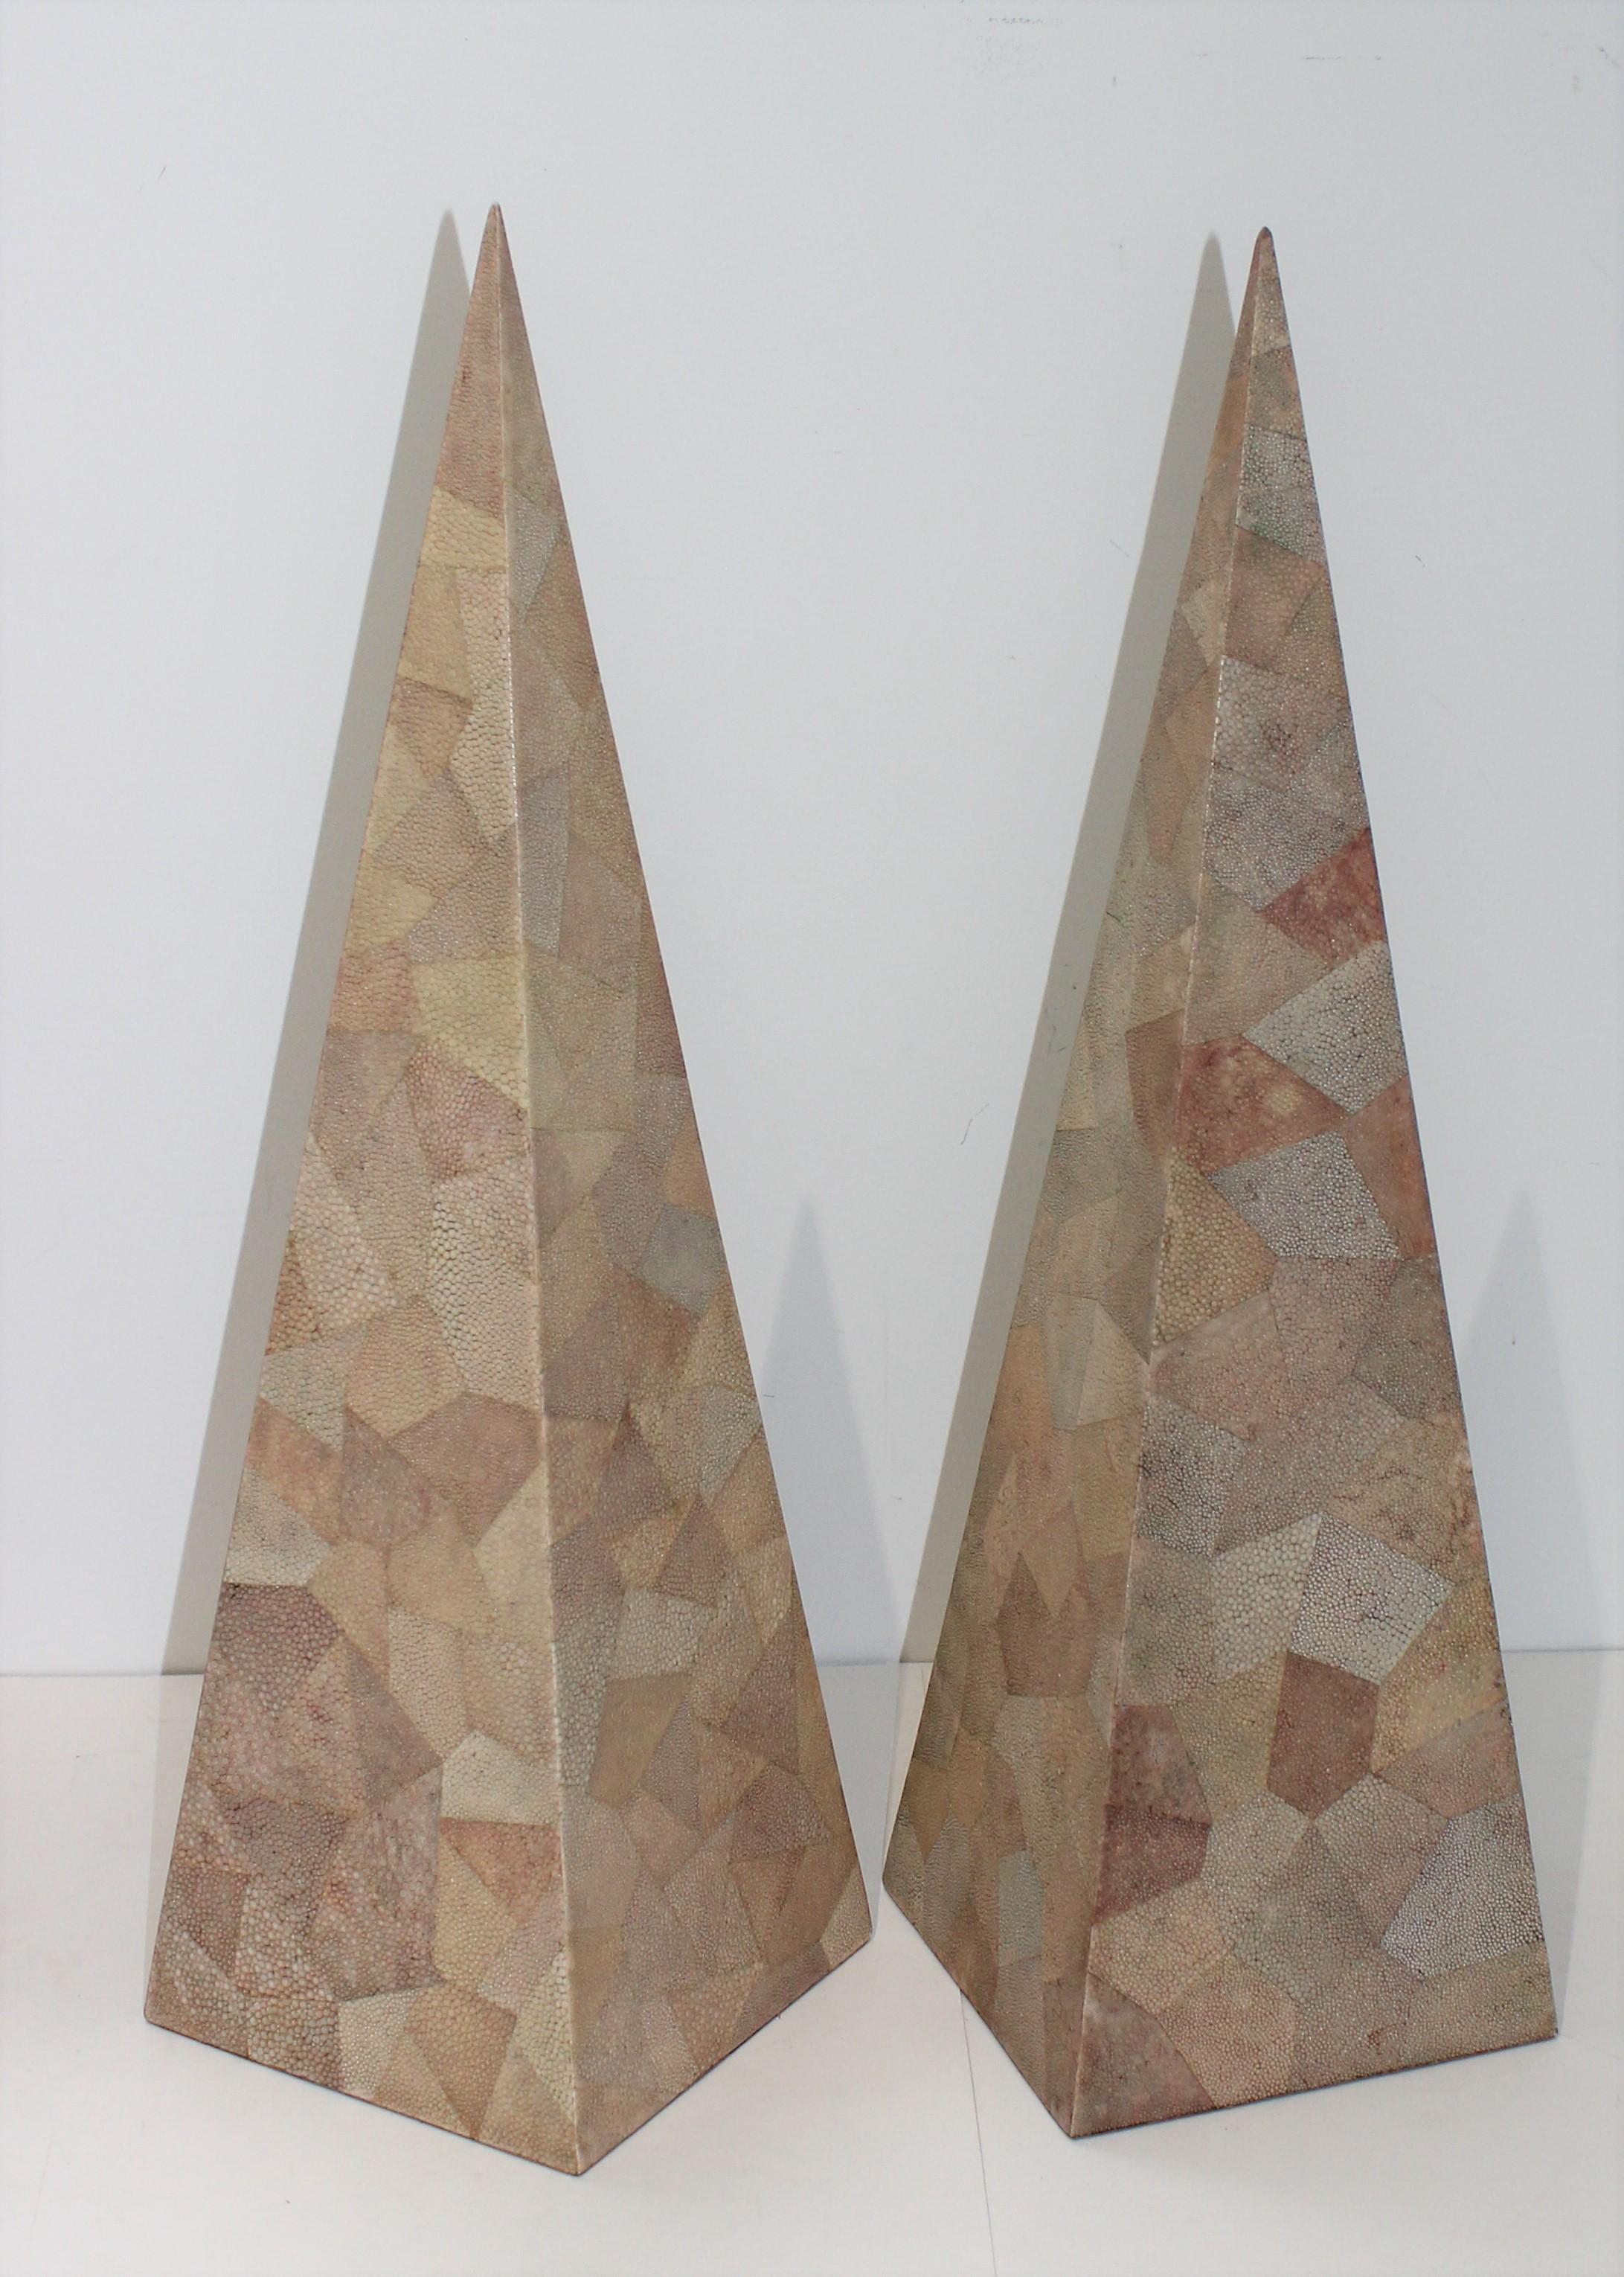 Vintage Maitland-Smith Tessellated Shagreen Obelisks - a Set of 2.

Note these are not exactly the same size:
24